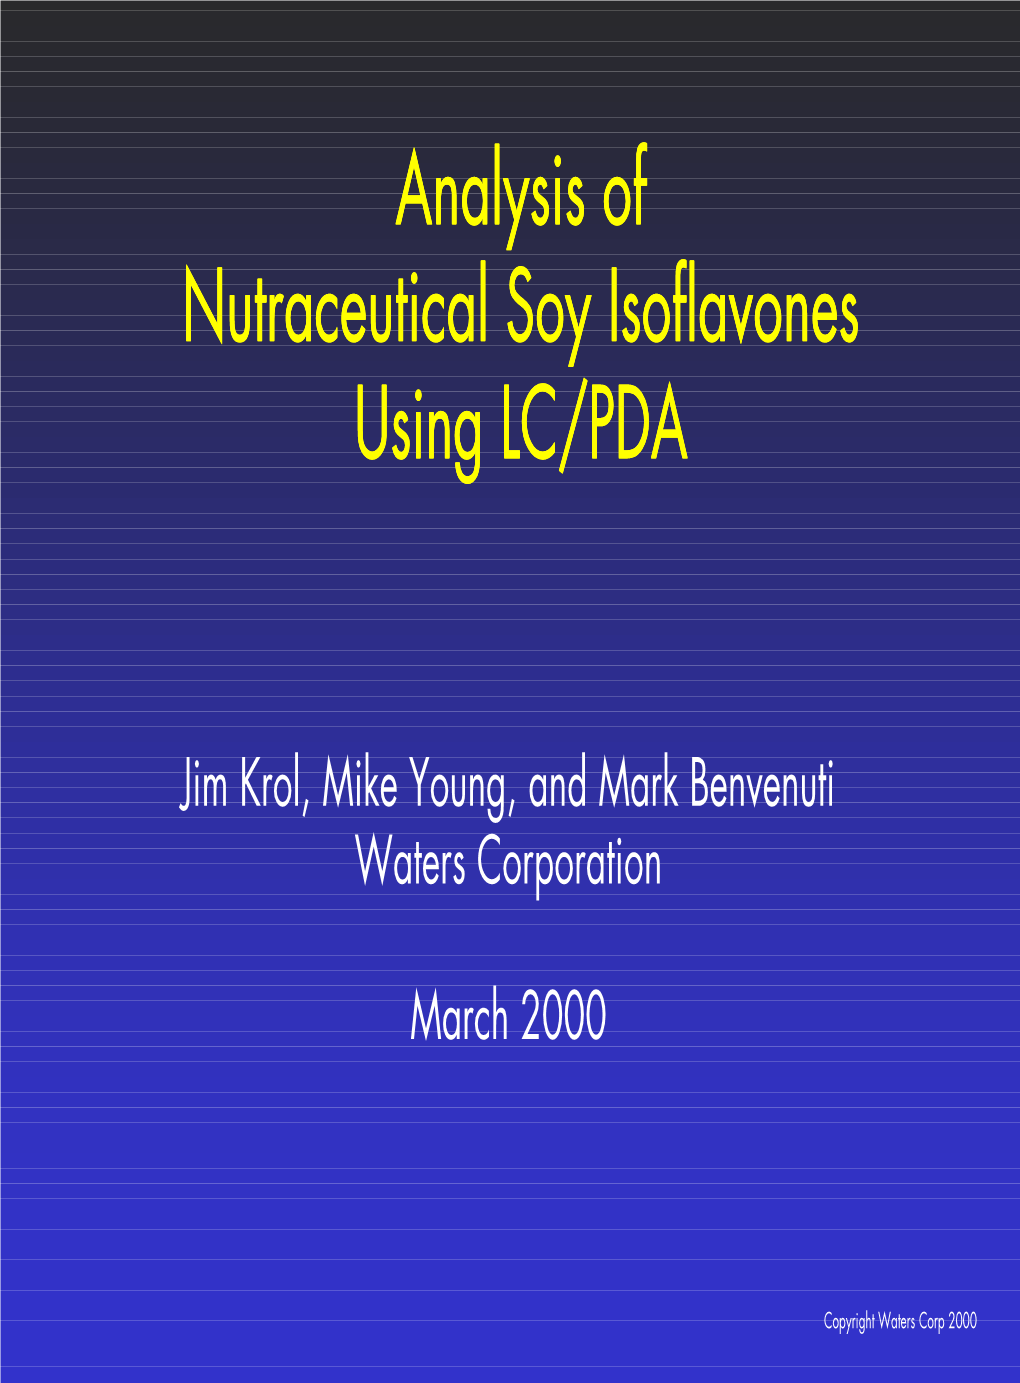 Analysis of Nutraceutical Soy Isoflavones Using LC/PDA